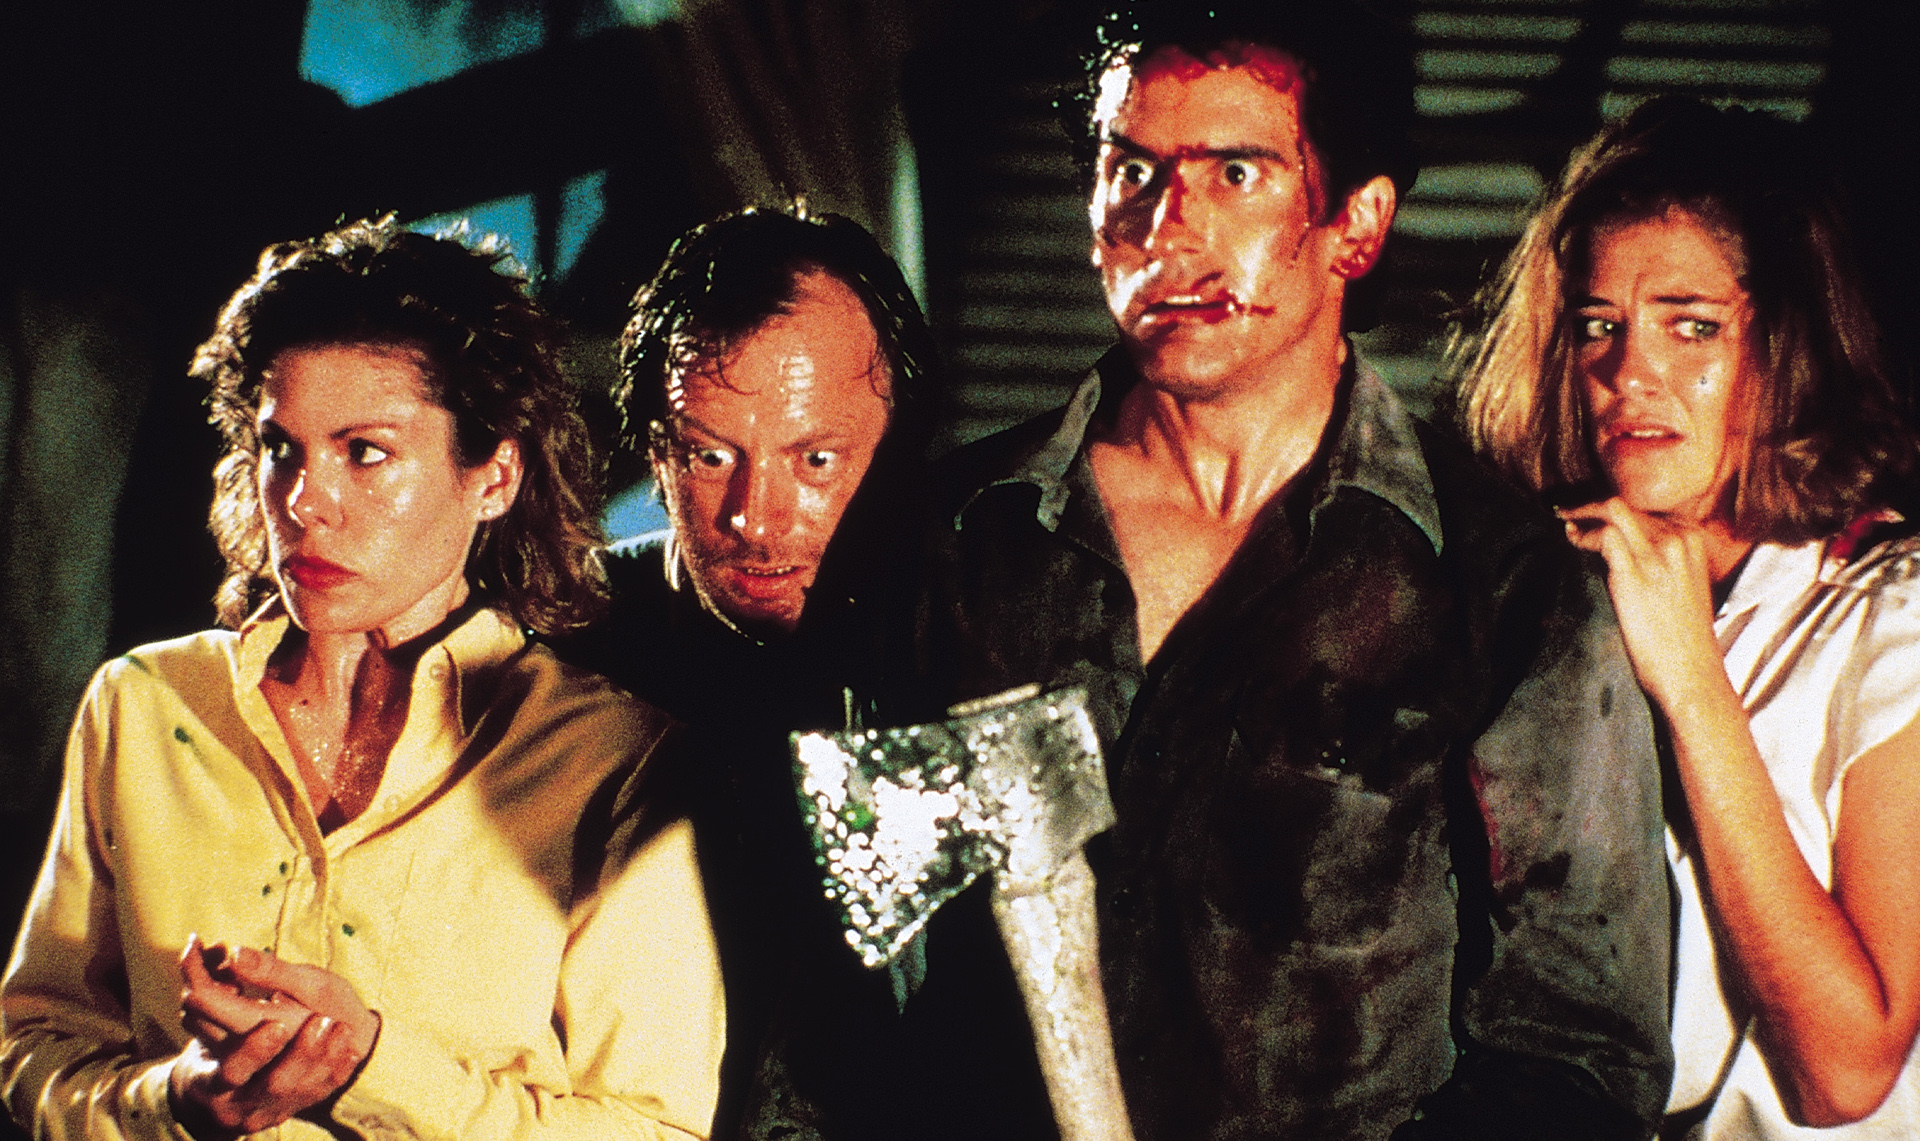 A still from Evil Dead 2. Four characters stand close to each other in fear of approaching zombies.